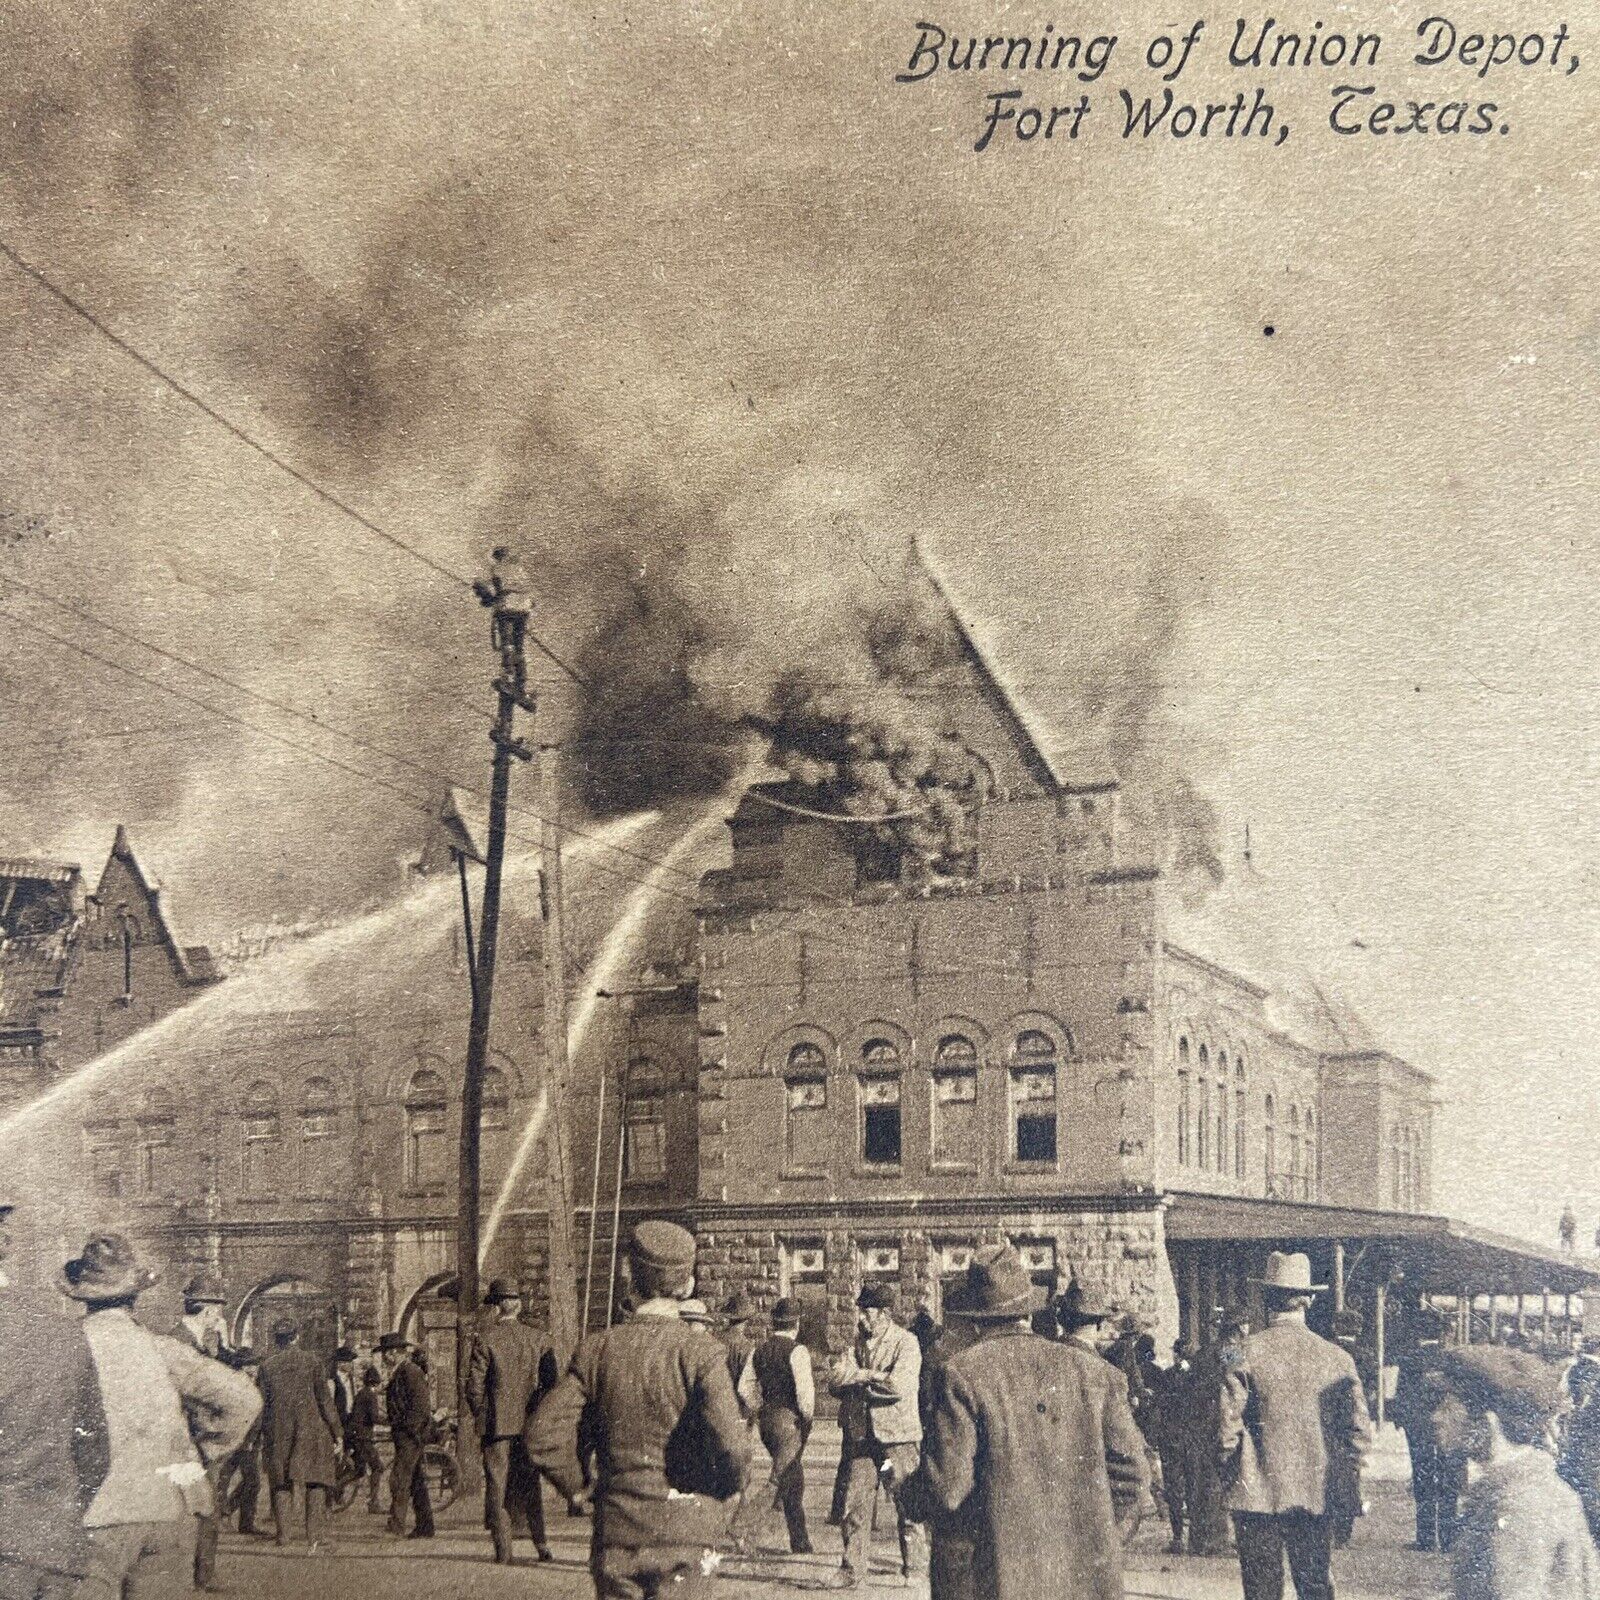 1908 VINTAGE REAL PHOTO PC BURNING OF THE UNION DEPOT FORT WORTH TEXAS RPPC